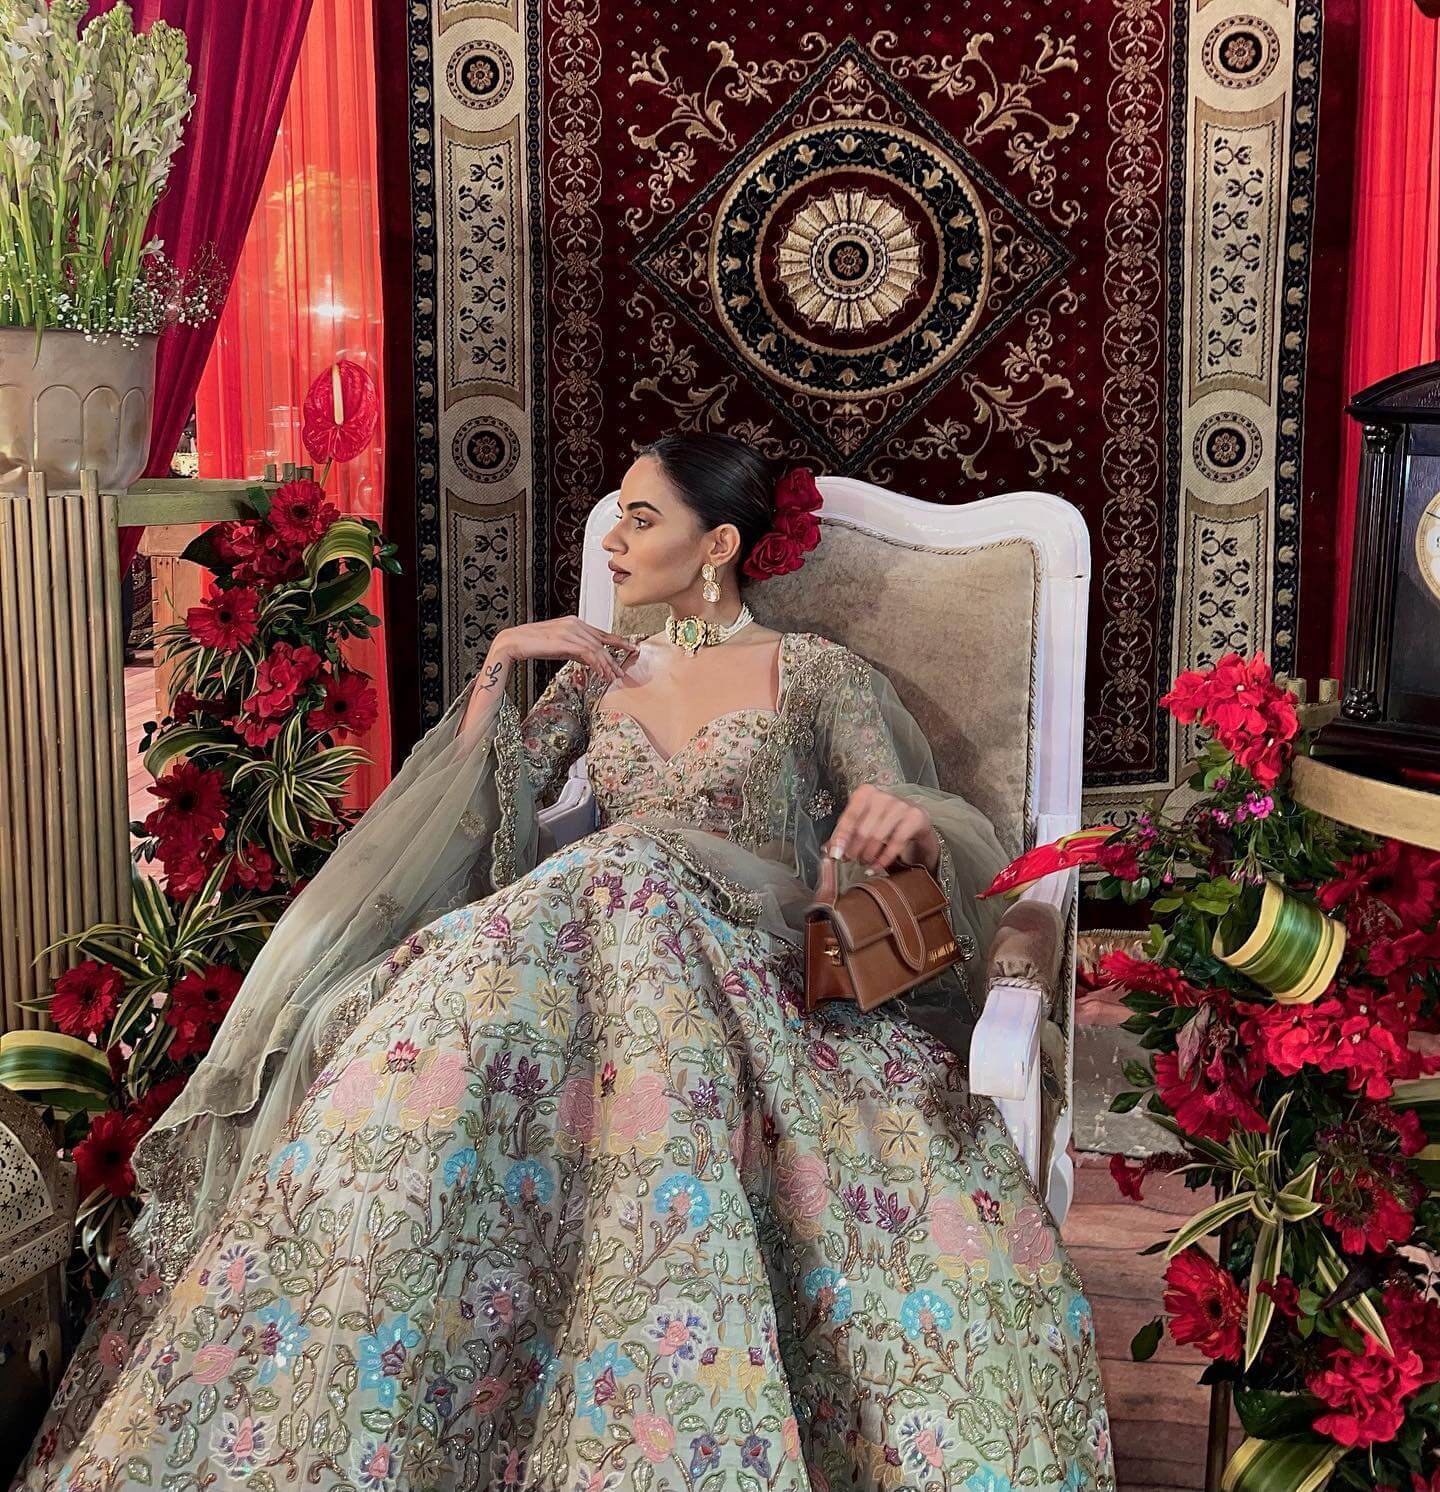 Komal Pandey Gives Princess Vibes In The Spectacular Floral Embroidered Lehenga